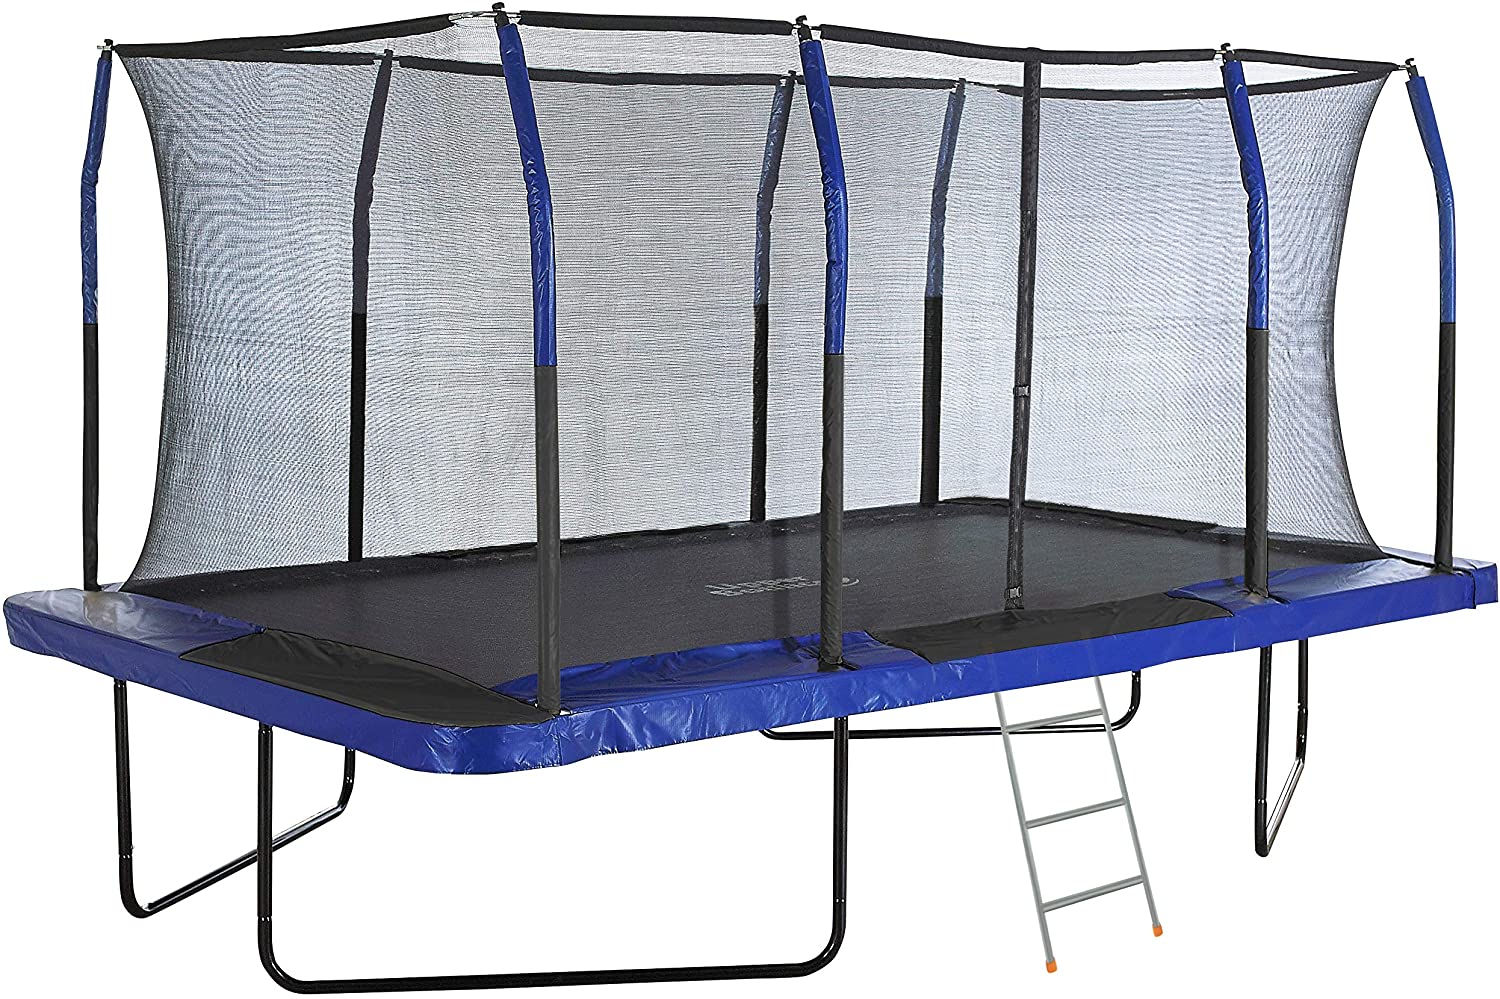 Best Rectangle Trampolines That You Can Buy [2020 Reviews]